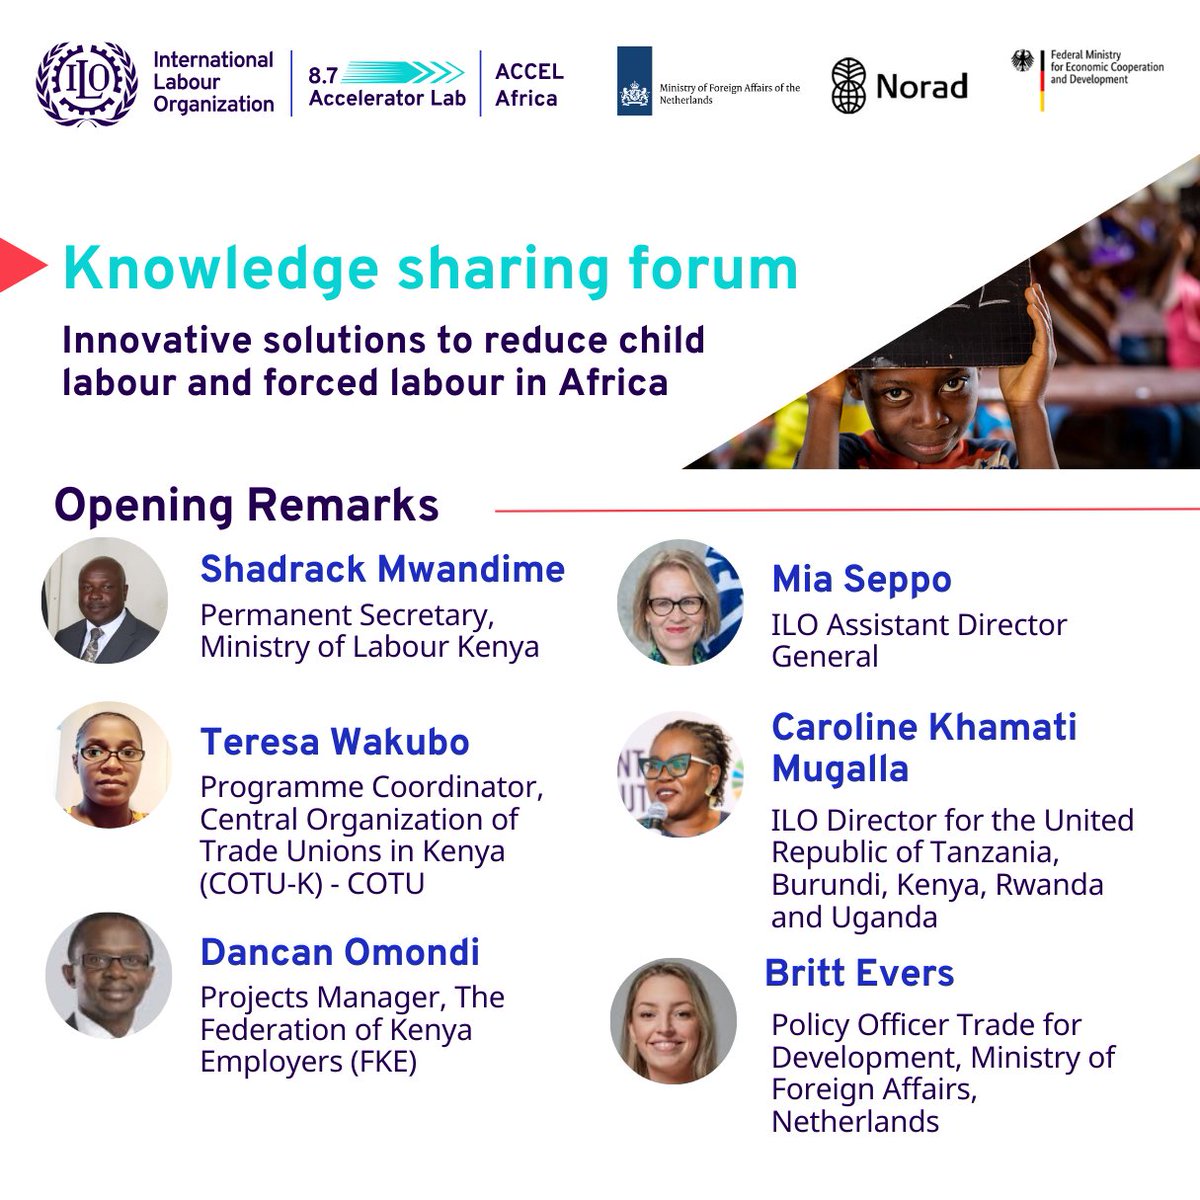 ✨ The opening ceremony of our Knowledge Sharing Forum has started! A special thanks to all speakers and delegates from all across Africa committed to making a change. Follow our journey over the next three days using #SayNoToChildLabour #EndForcedLabour